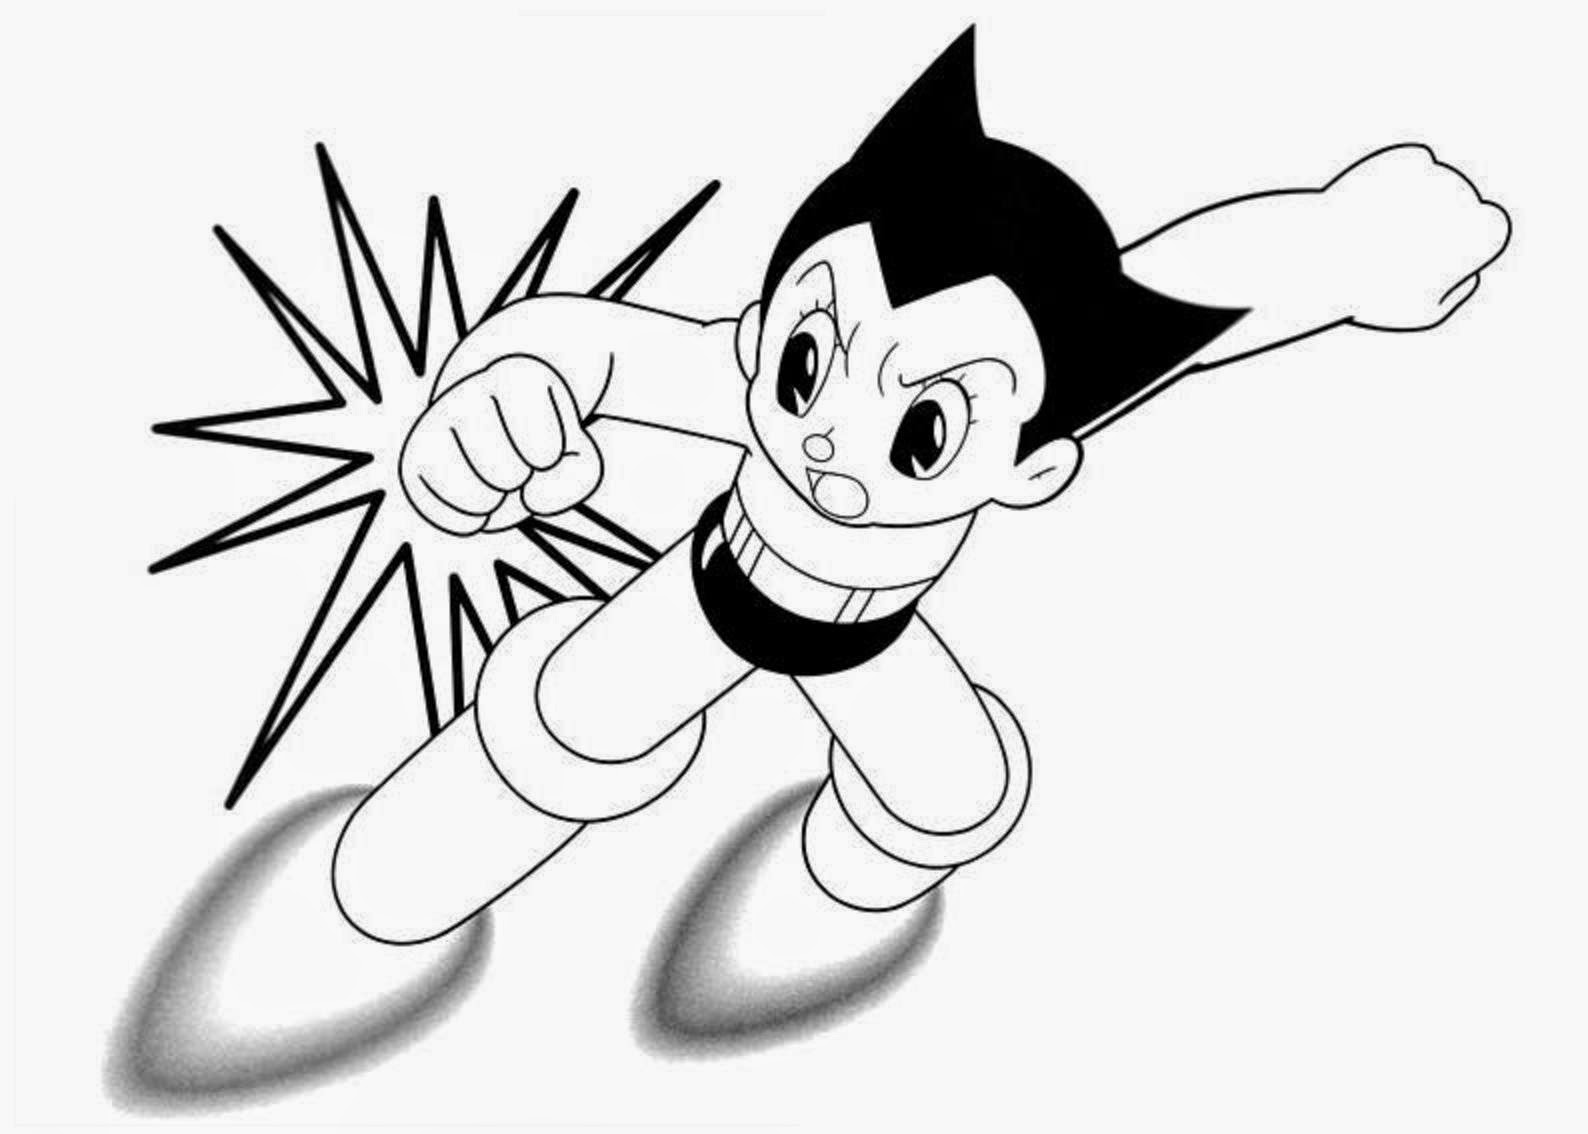 Astro Boy Coloring Drawing Free Wallpaper - Astro Boy Coloring Pages - HD Wallpaper 